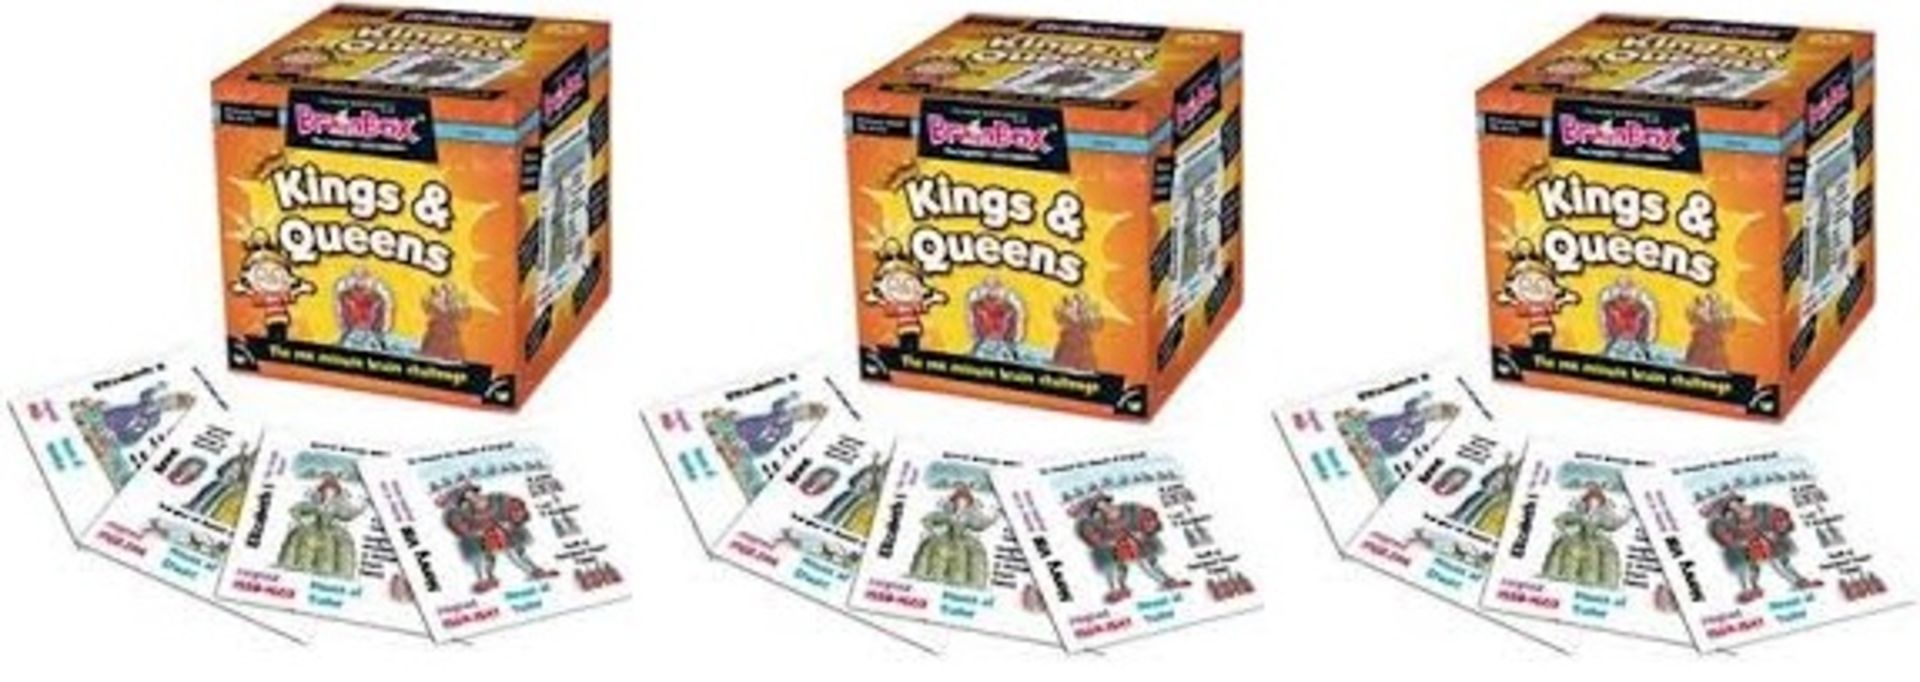 V Grade A A Lot Of Three Brain Box Kings & Queens-10 Minute Brain Challenge ISP £32.97 (Argos) - Image 2 of 2